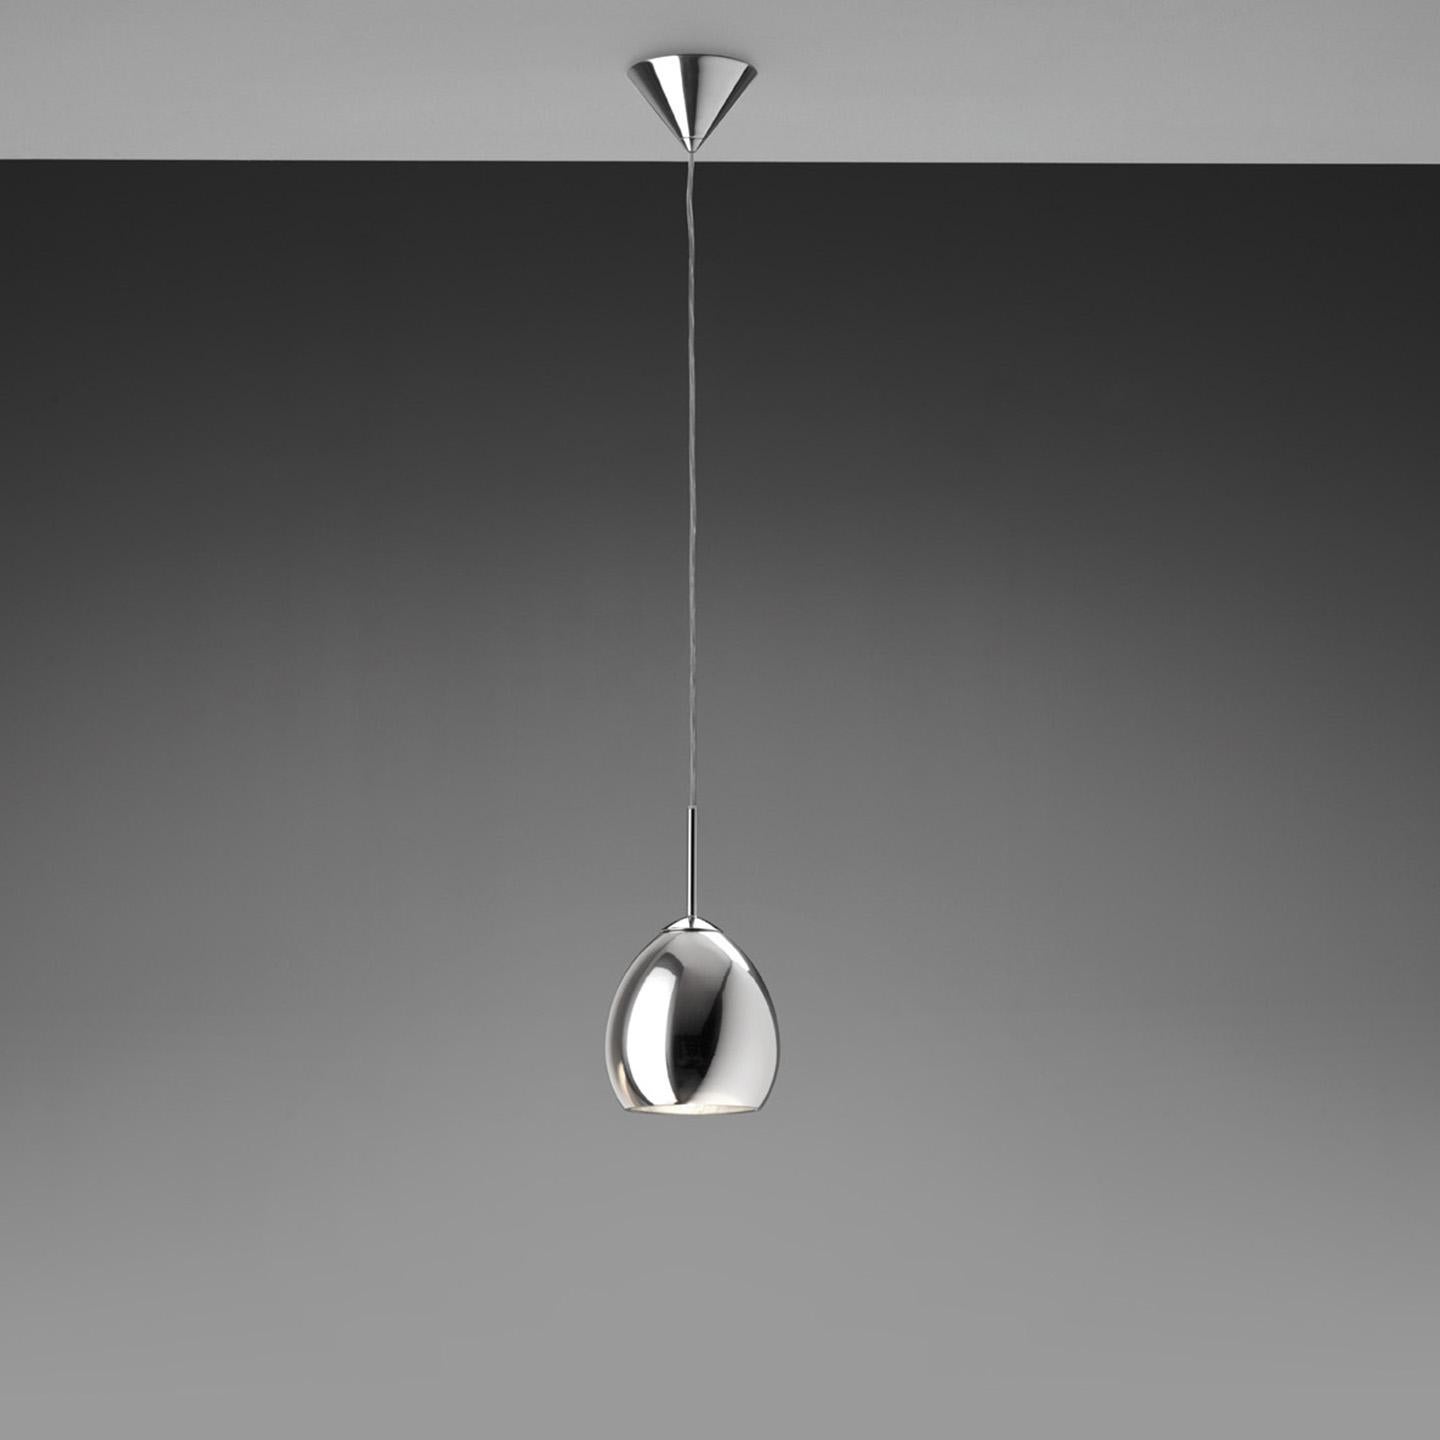 The Golf Pendant is a whimsical, bestselling design from the historic Leucos design collection. Designed by Toso & Massari, the Golf Collection includes a versatile array of pendants, wall and ceiling lamps. Each comes with the option of a